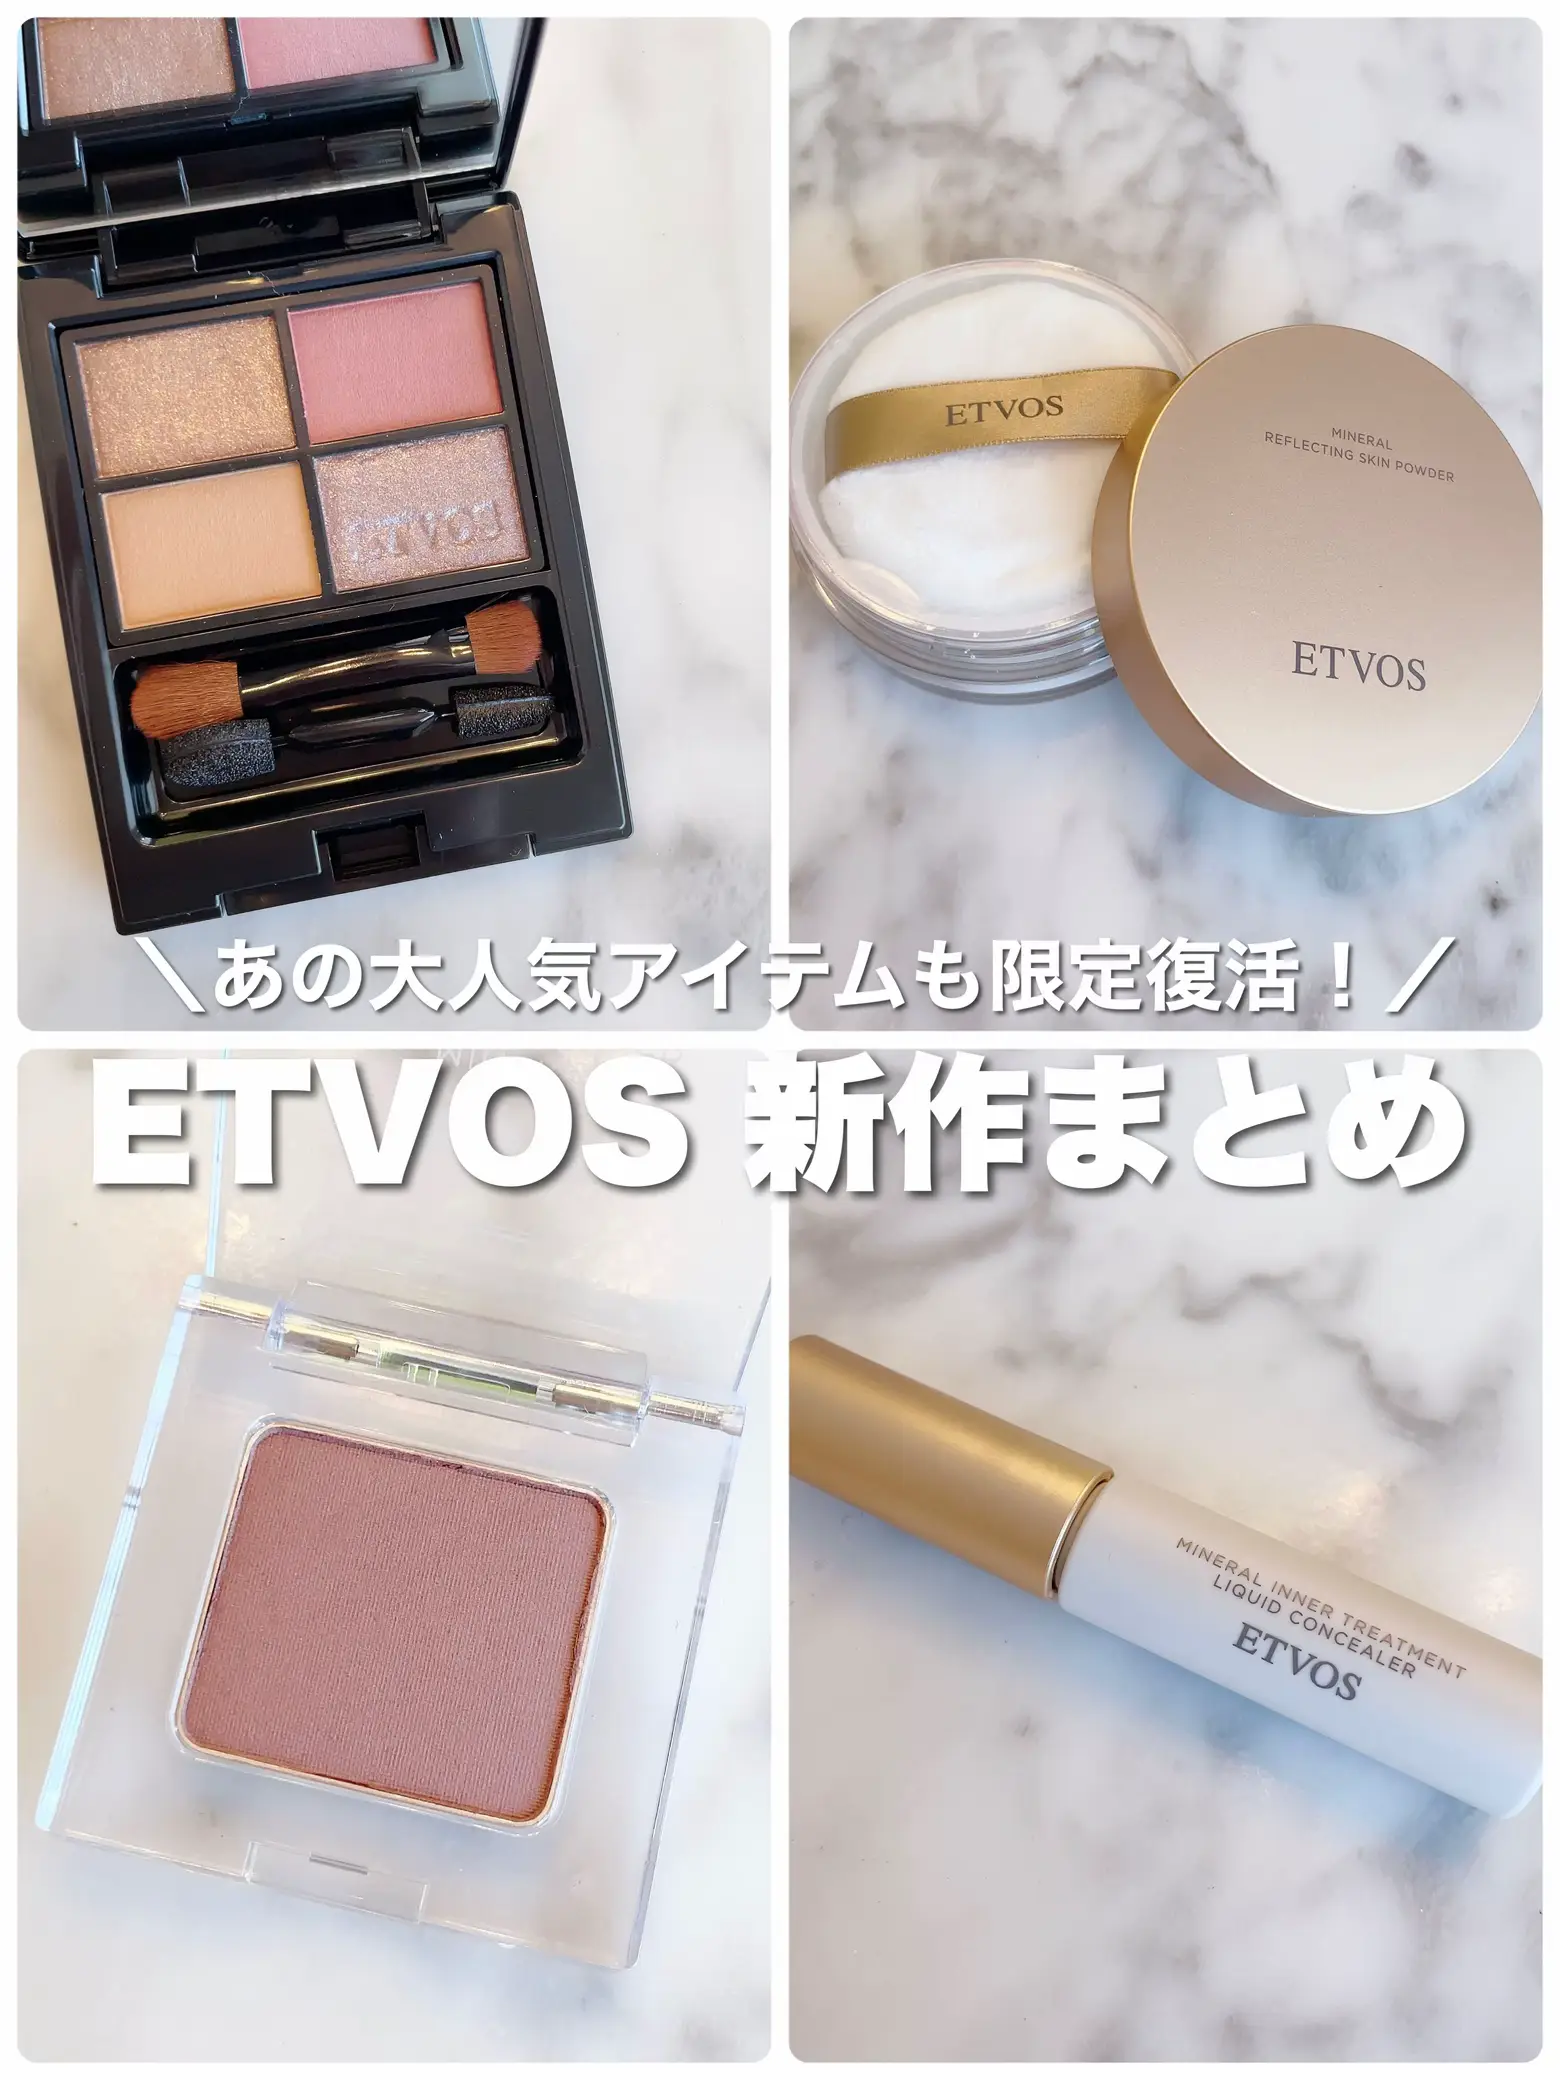 Autumn of ETVOS is a big revival of popular items ⁉️ & beautiful